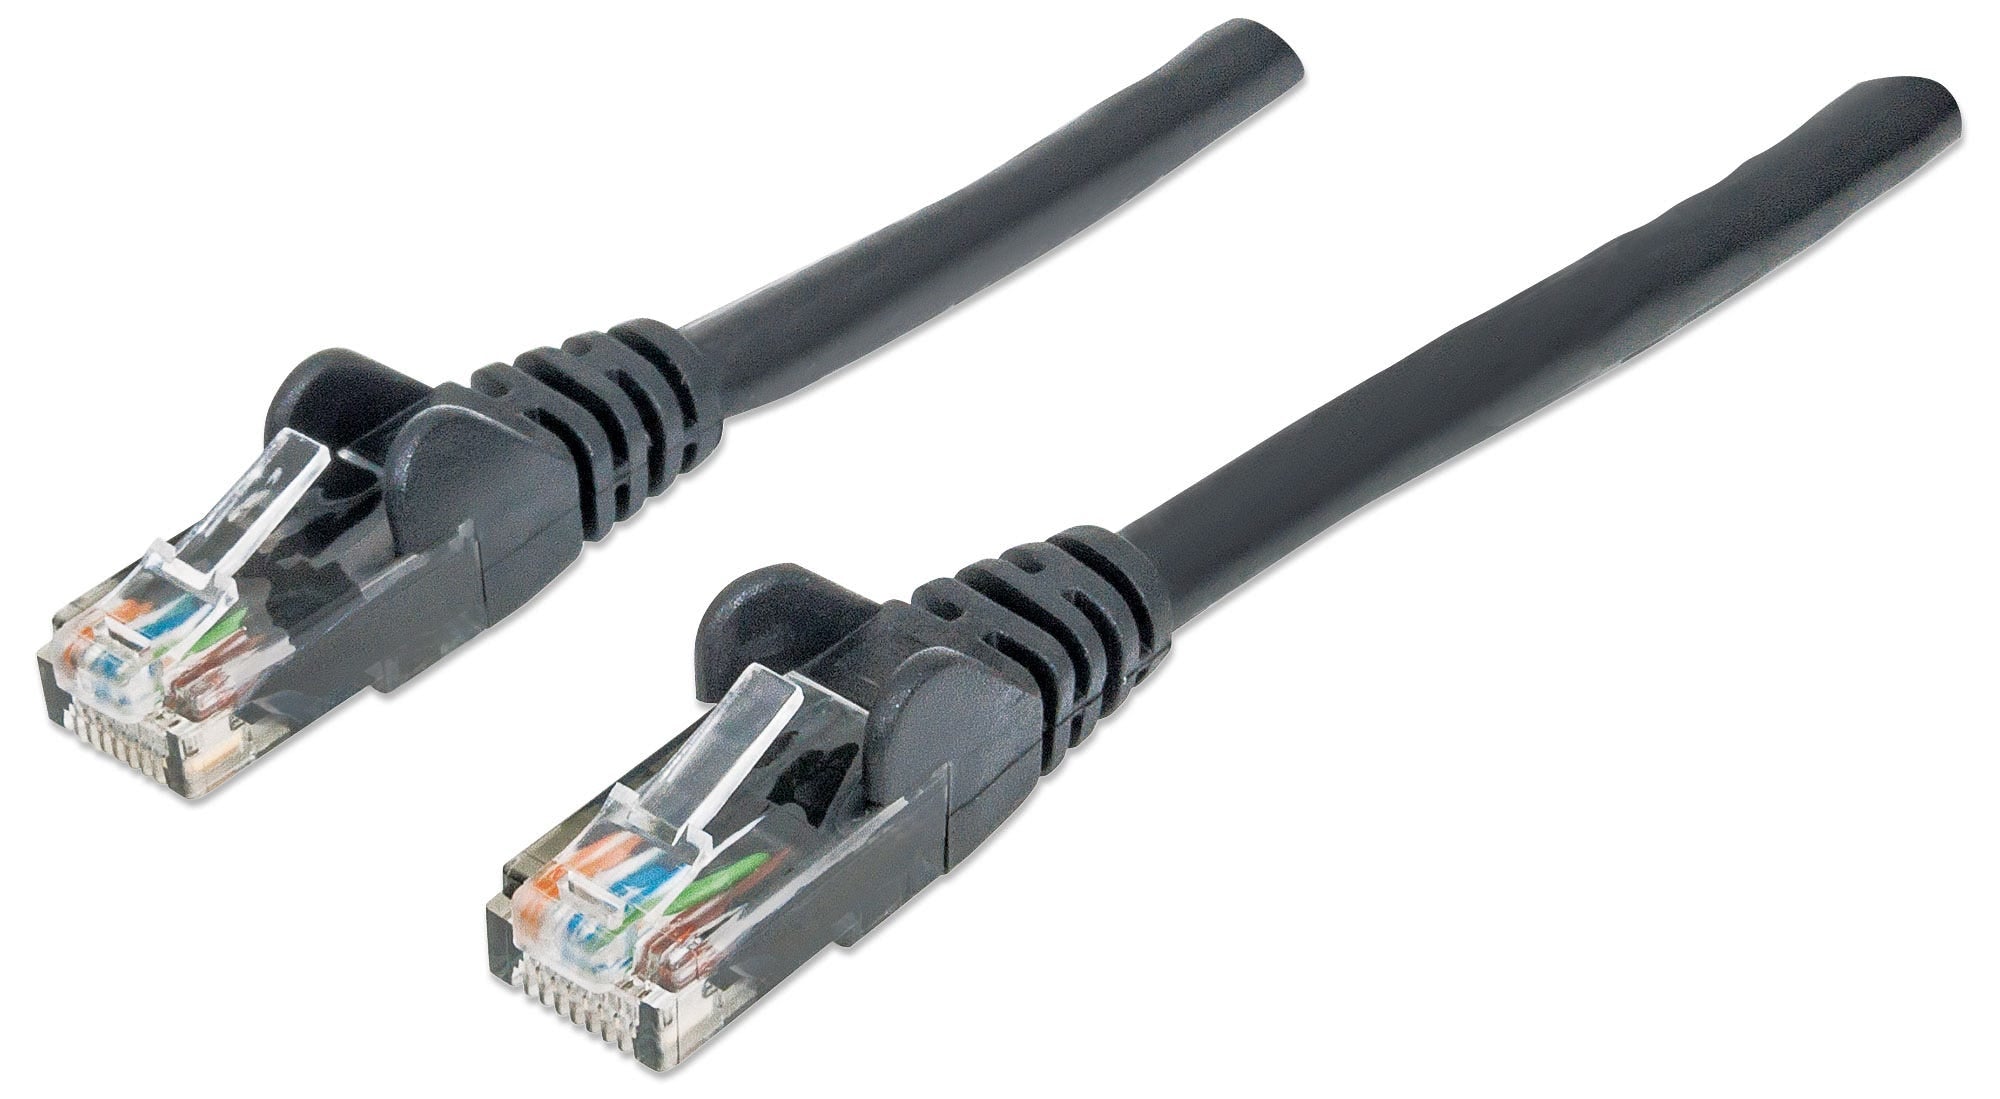 Intellinet Network Patch Cable, Cat6, 20m, Black, CCA, U/UTP, PVC, RJ45, Gold Plated Contacts, Snagless, Booted, Lifetime Warranty, Polybag